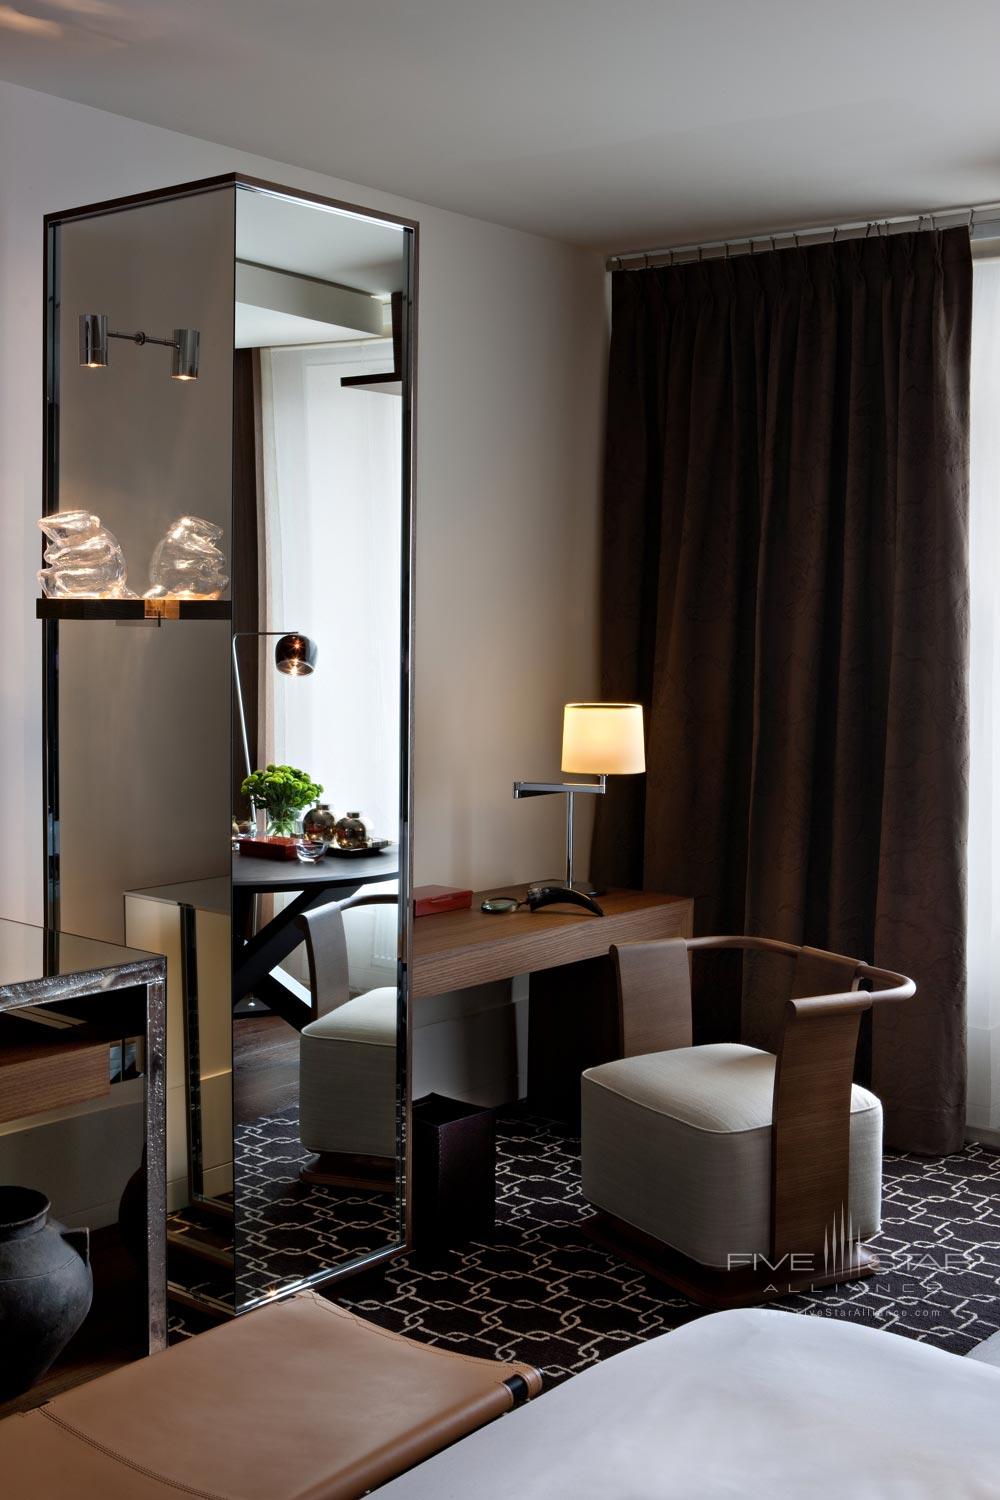 Park Guest Room Working Area at Ararat Park Hyatt Moscow, Moscow, Russia